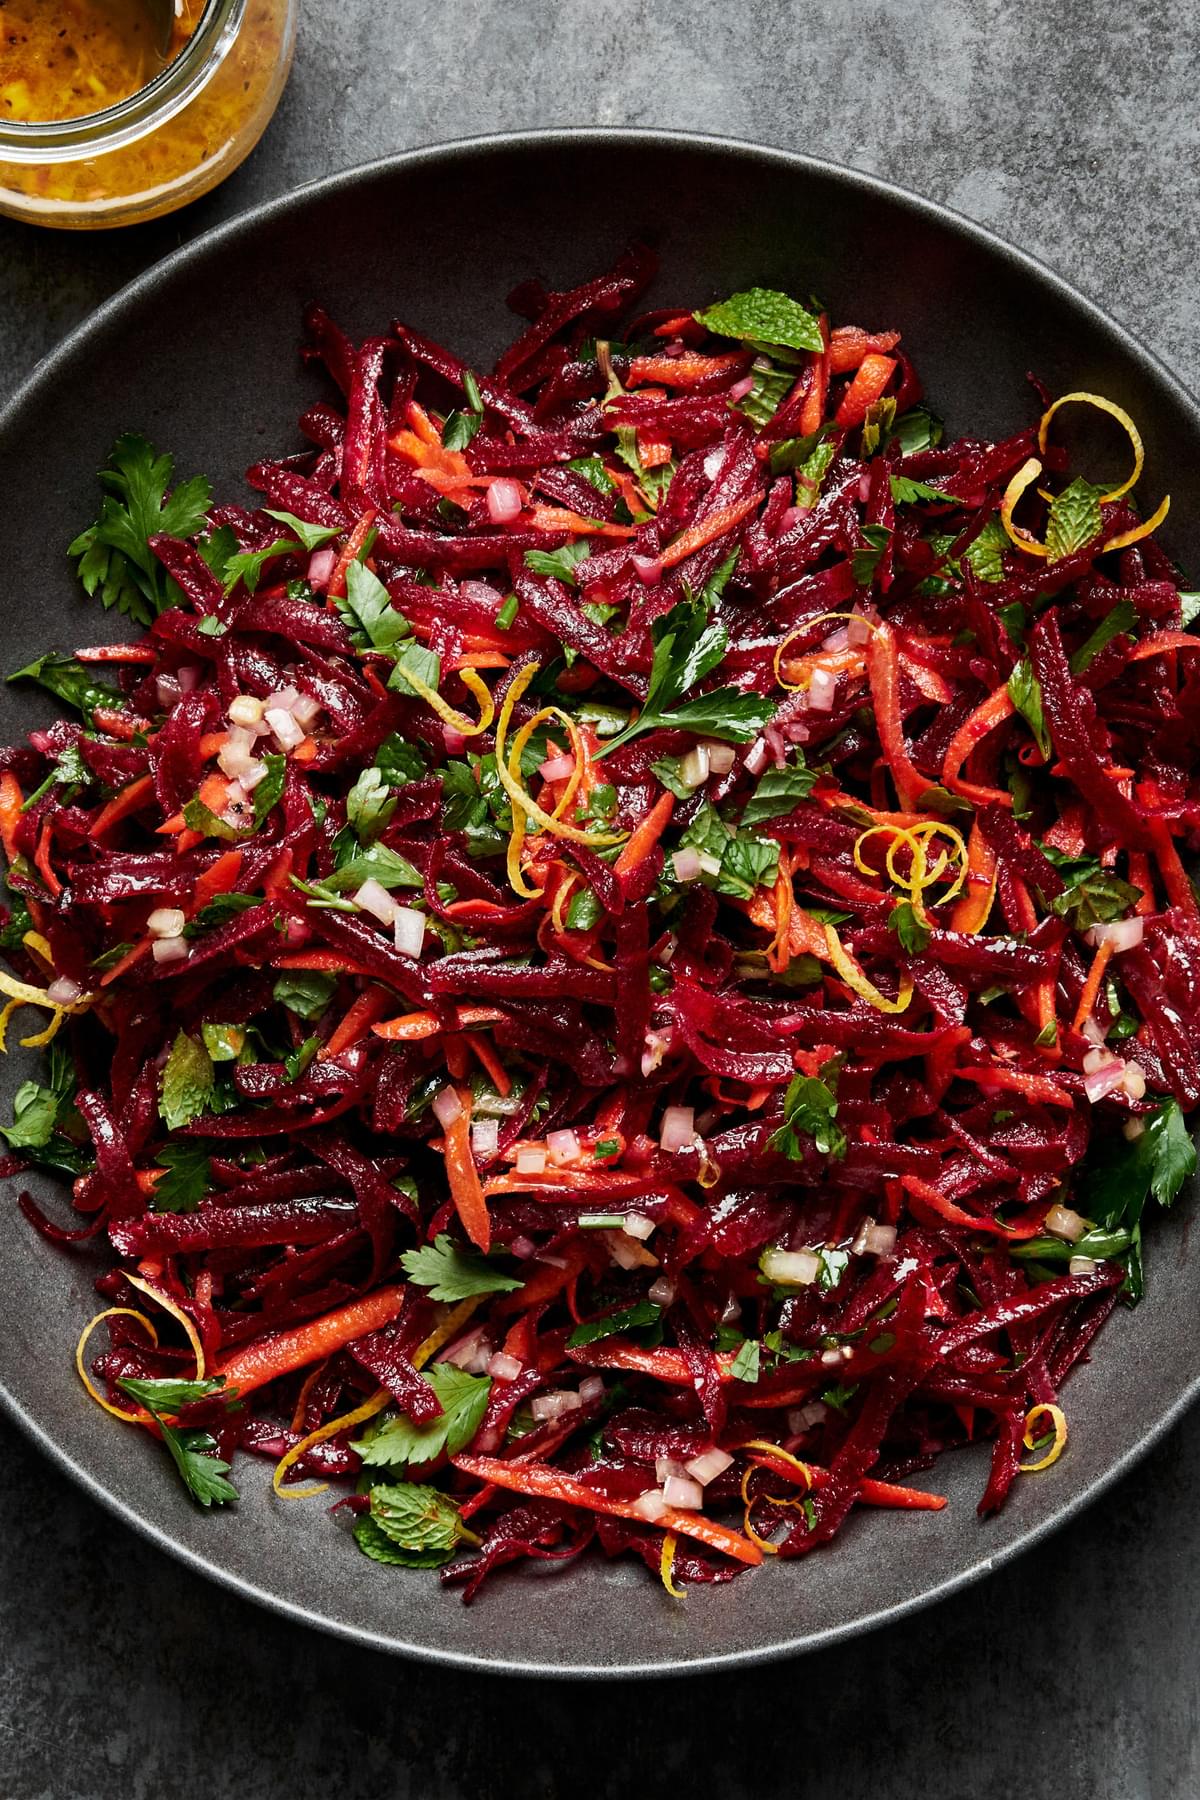 grated beet salad made with grated carrots, parsley, mint and homemade honey mustard dressing in a serving bowl